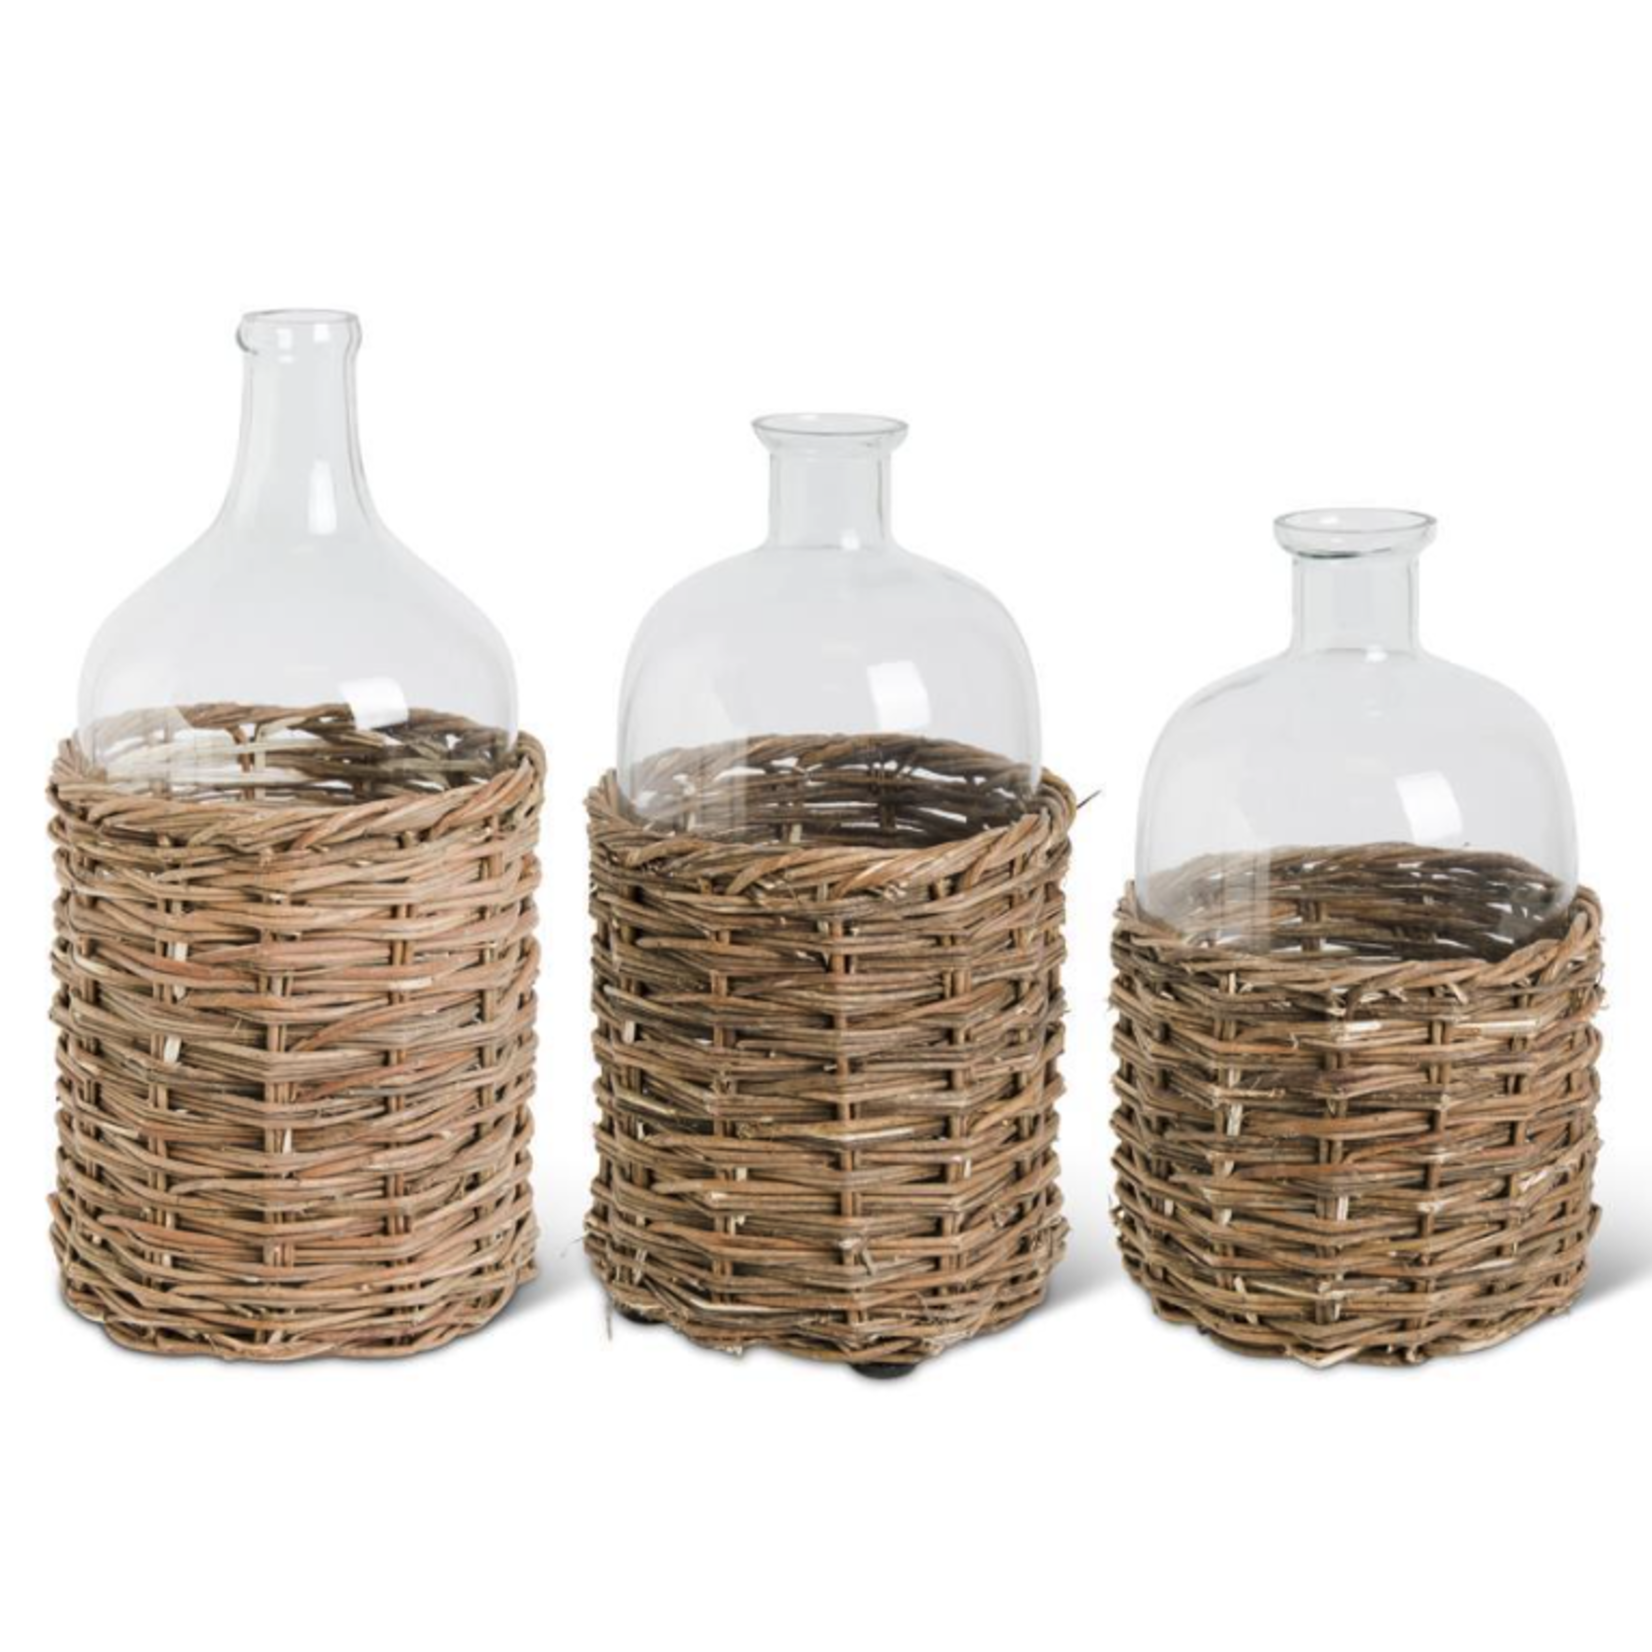 13", 15" & 18" Set Of 3 Glass Bottle With Natural Woven Rattan Basket